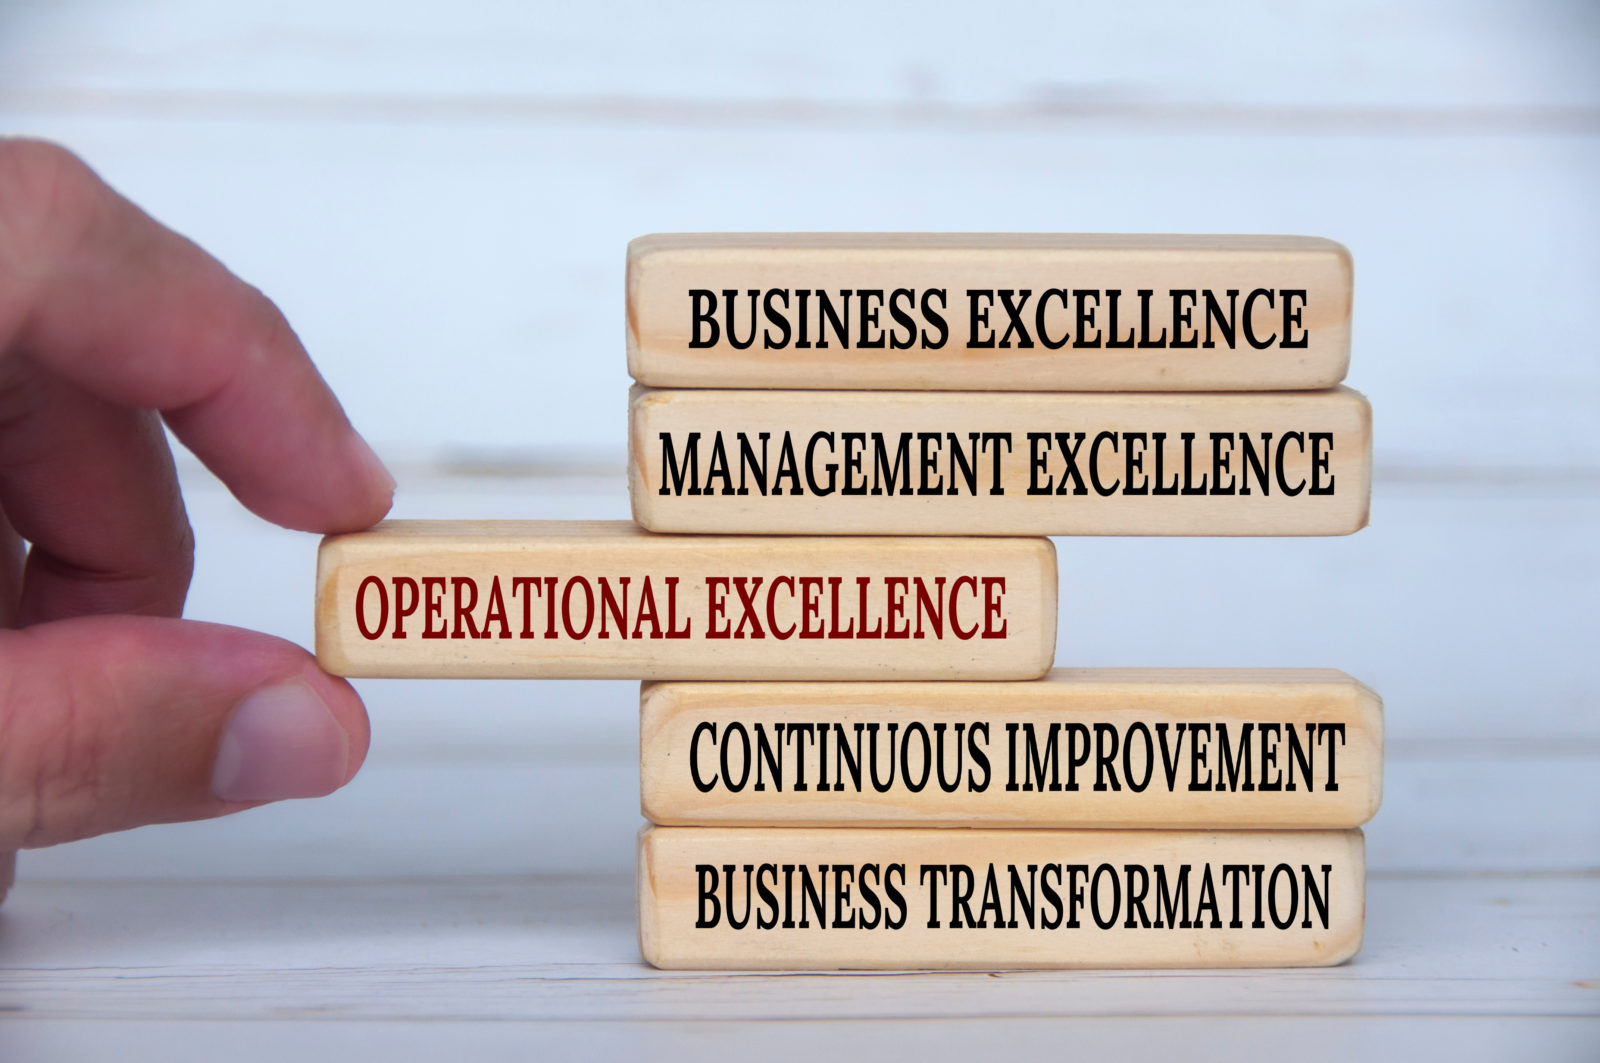 Business, management and operational excellence and continuous improvement text on wooden blocks. Business concept.